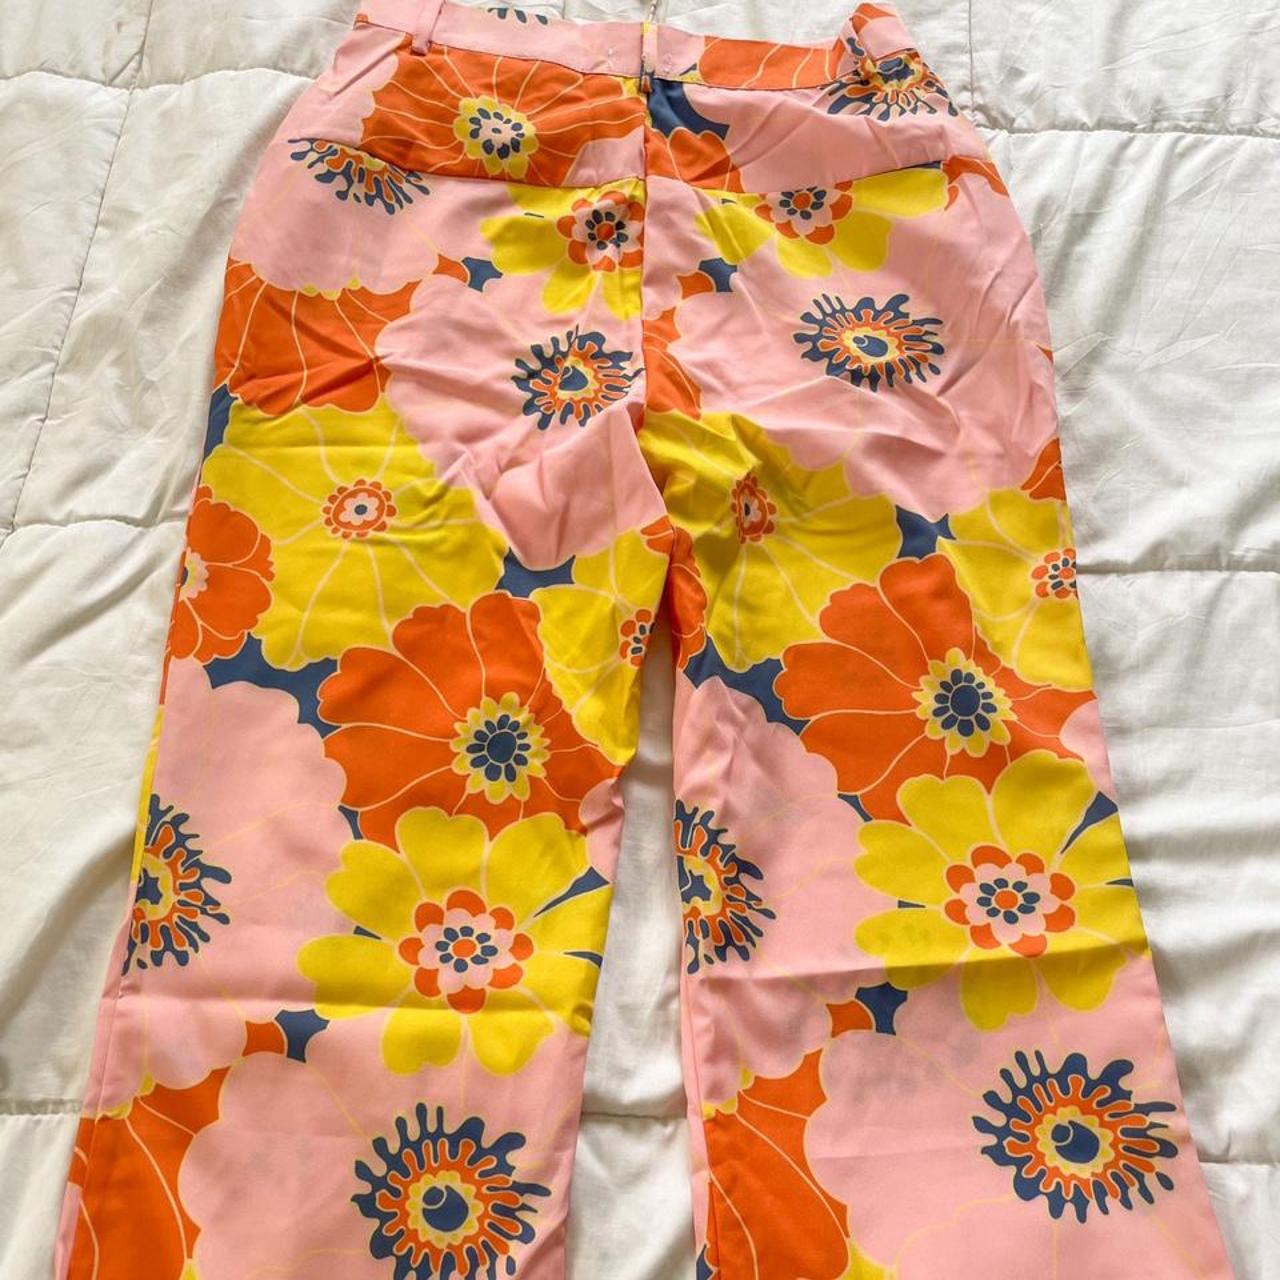 Urban Outfitters Women's Orange and Pink Jeans (3)